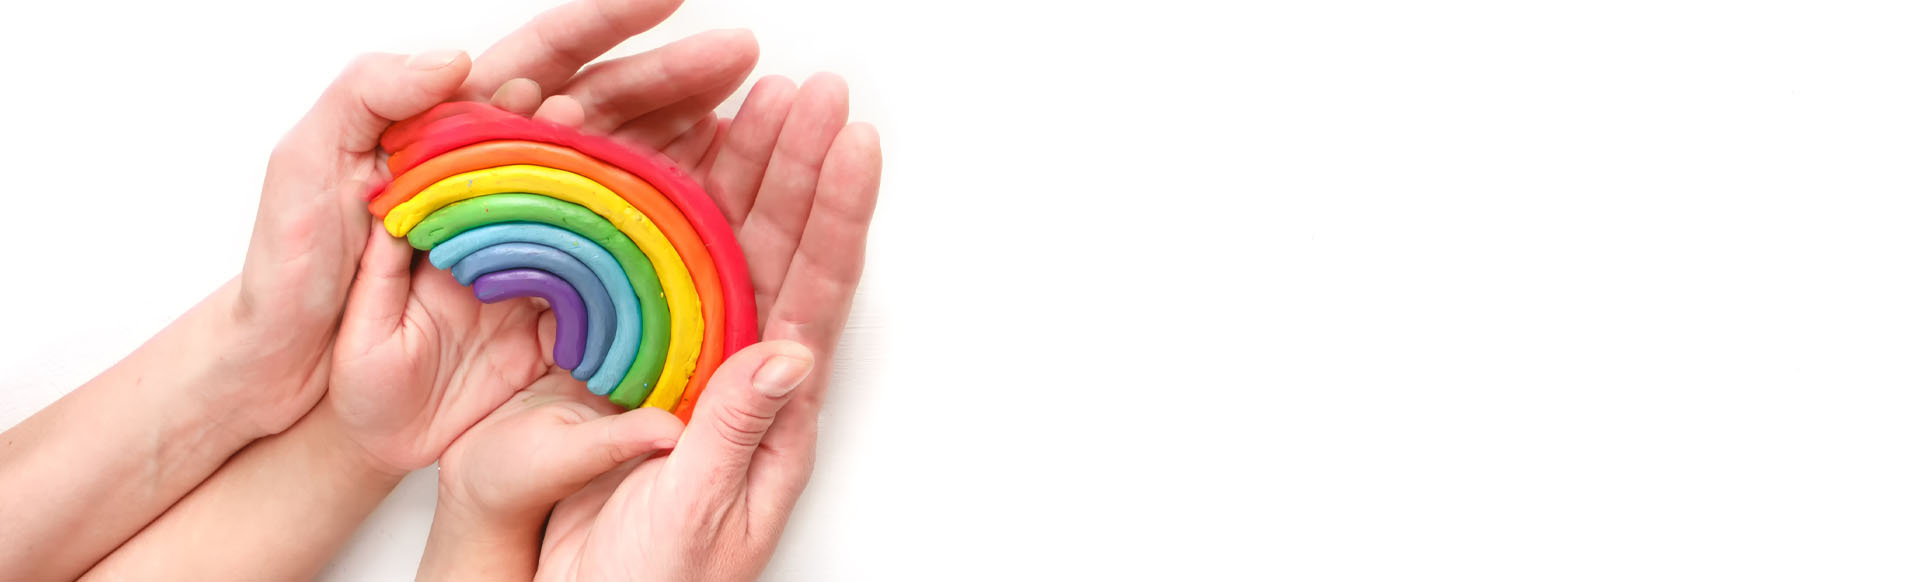 Image showing a close up of an adult and a child holding a rainbow in their hands